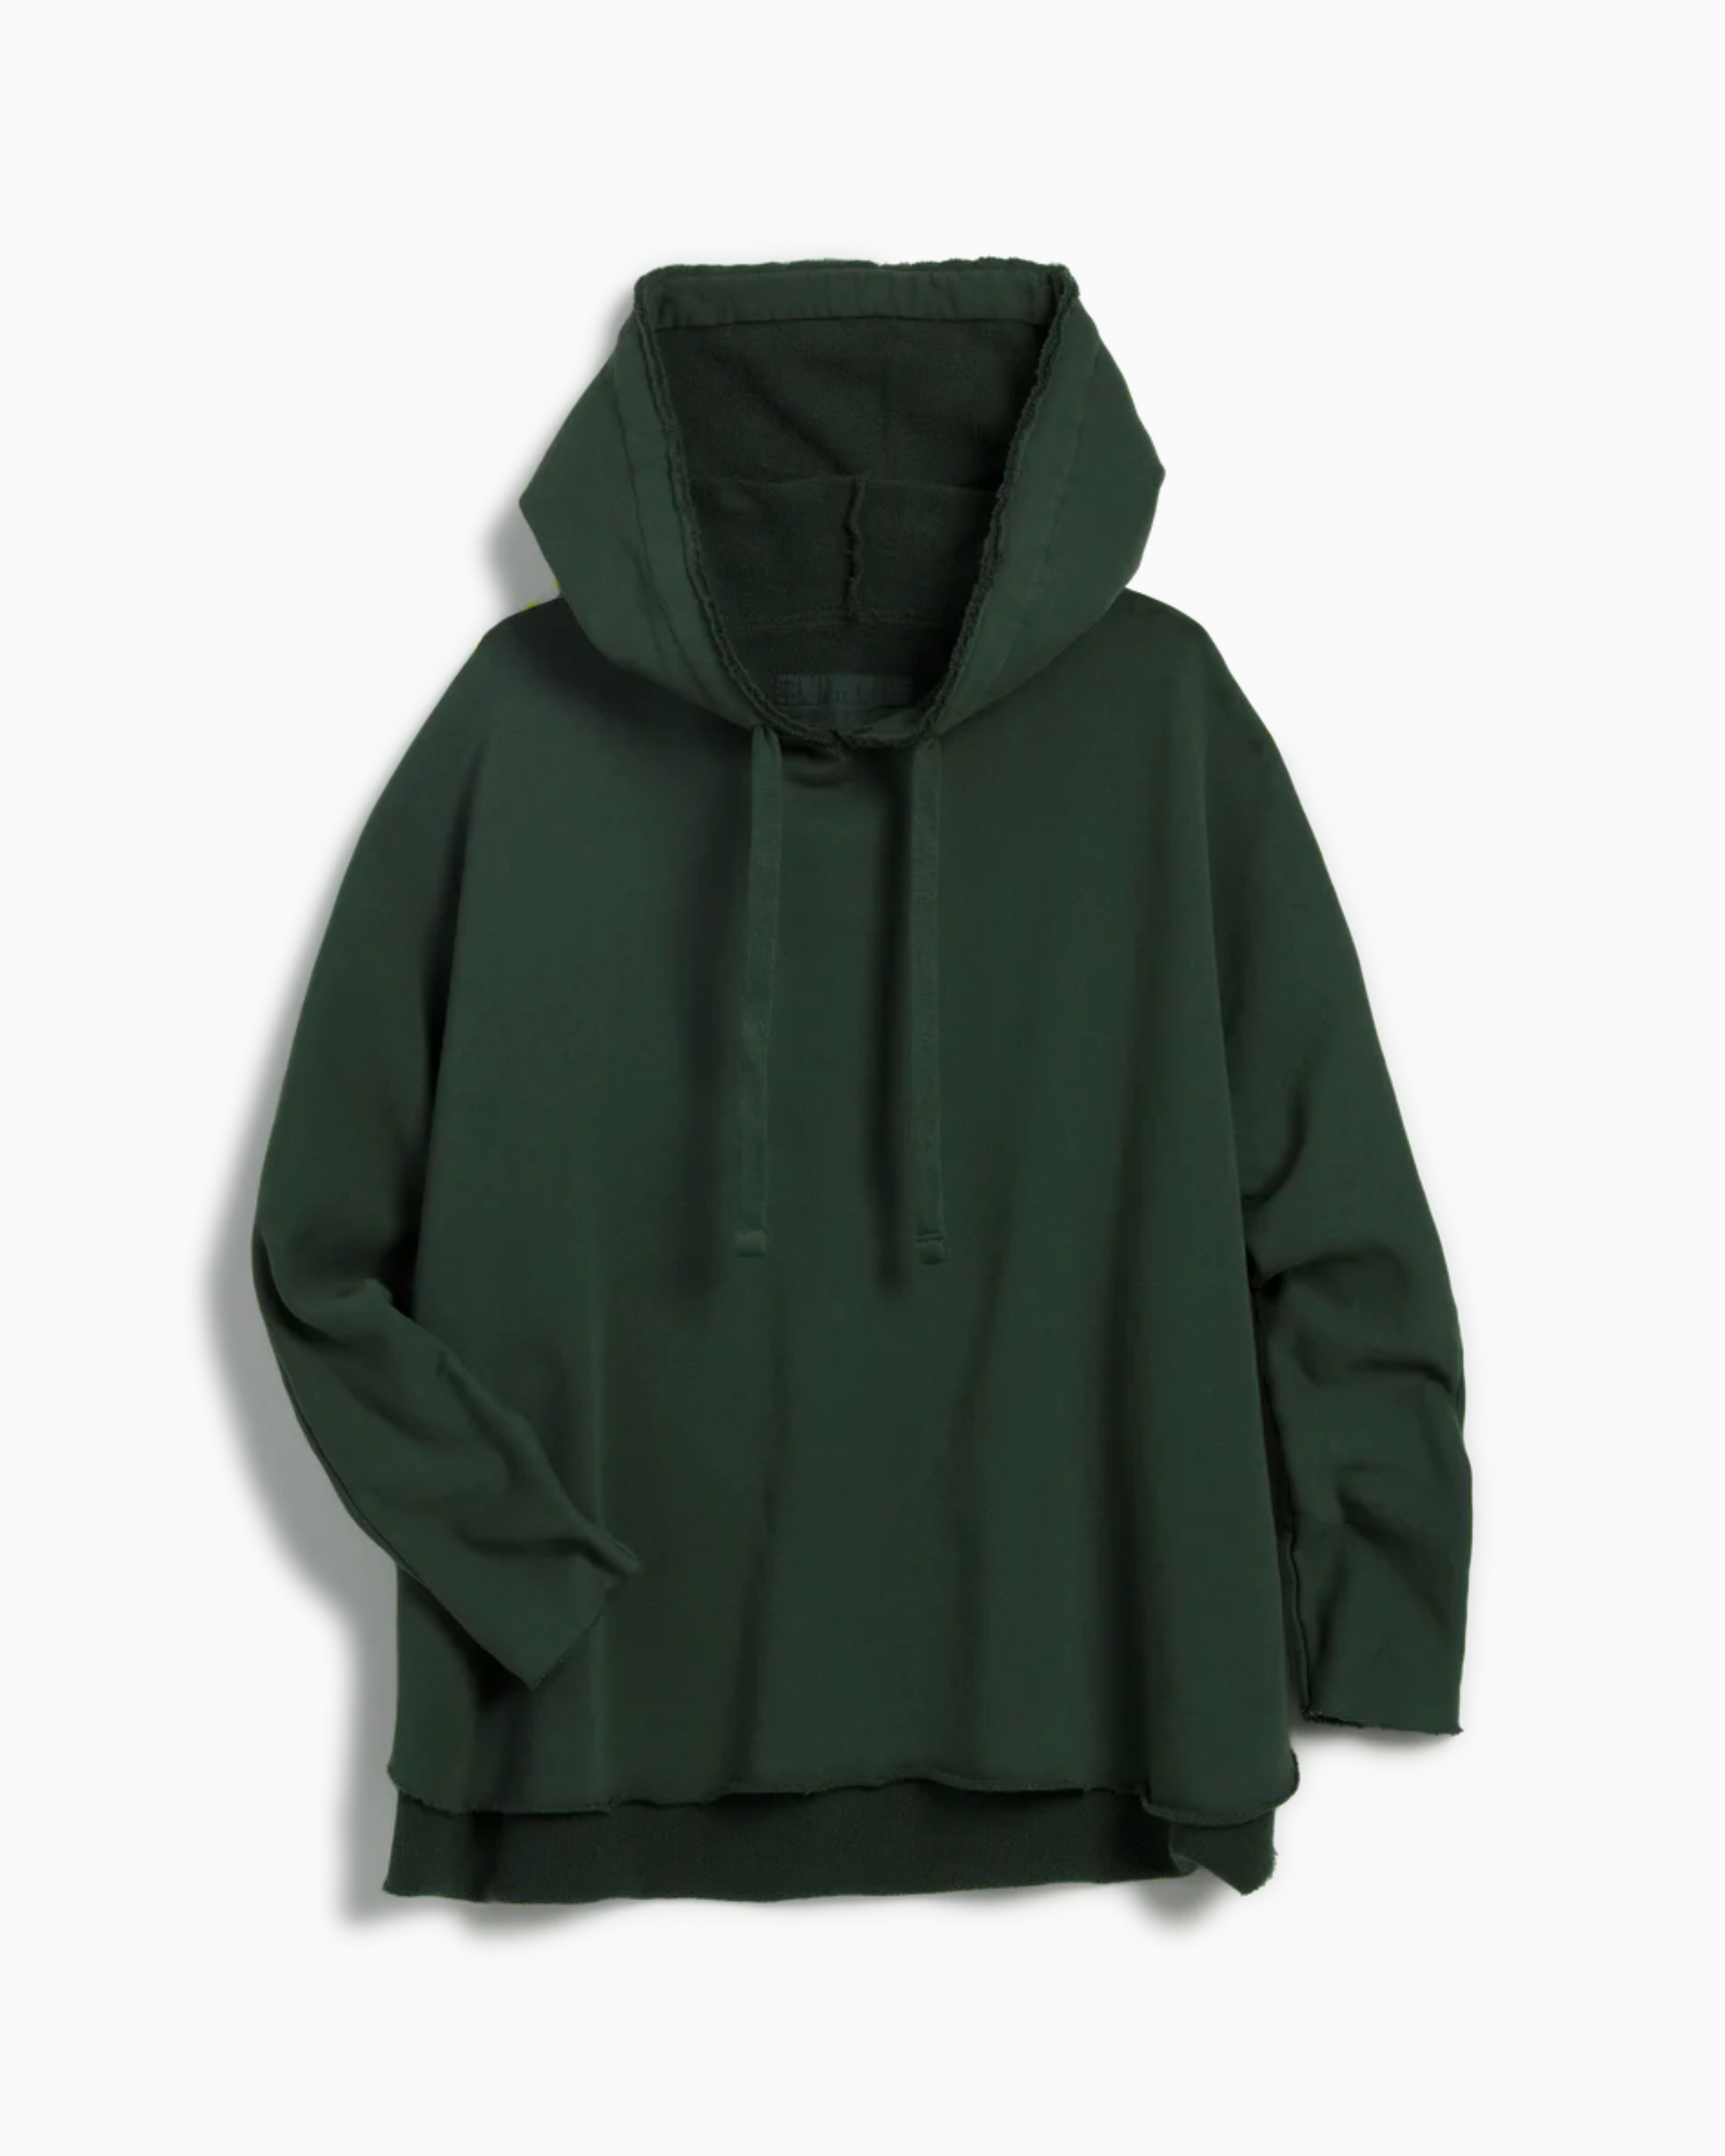 Frank and Eileen Kane Capelet Hoodie in Evergreen